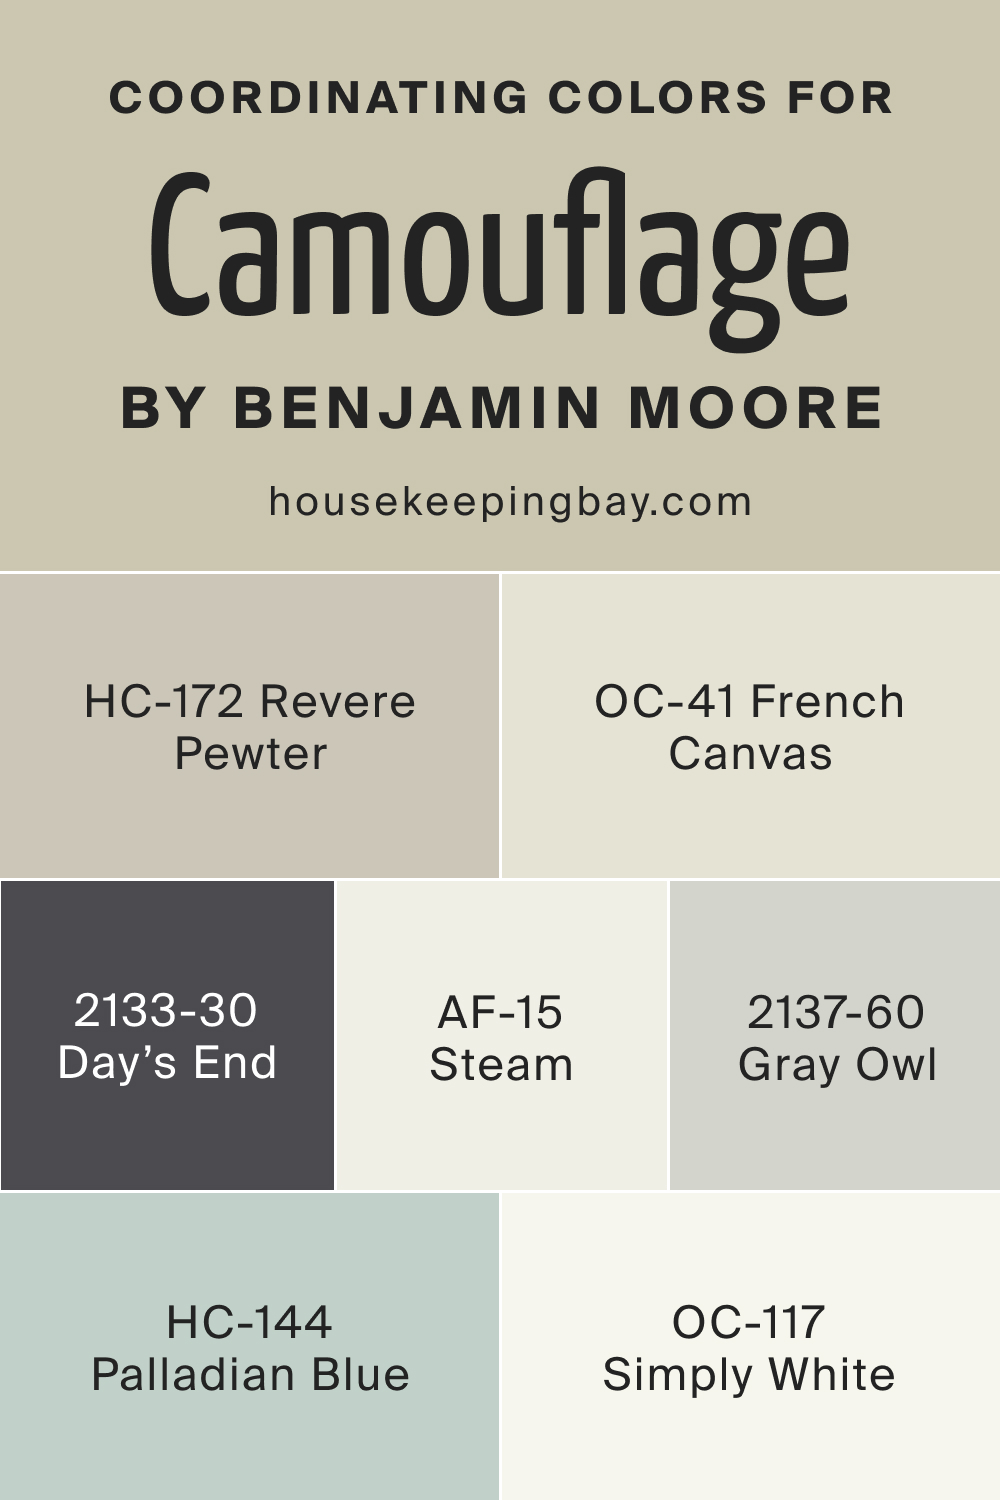 Coordinating Colors of BM Camouflage 2143-40